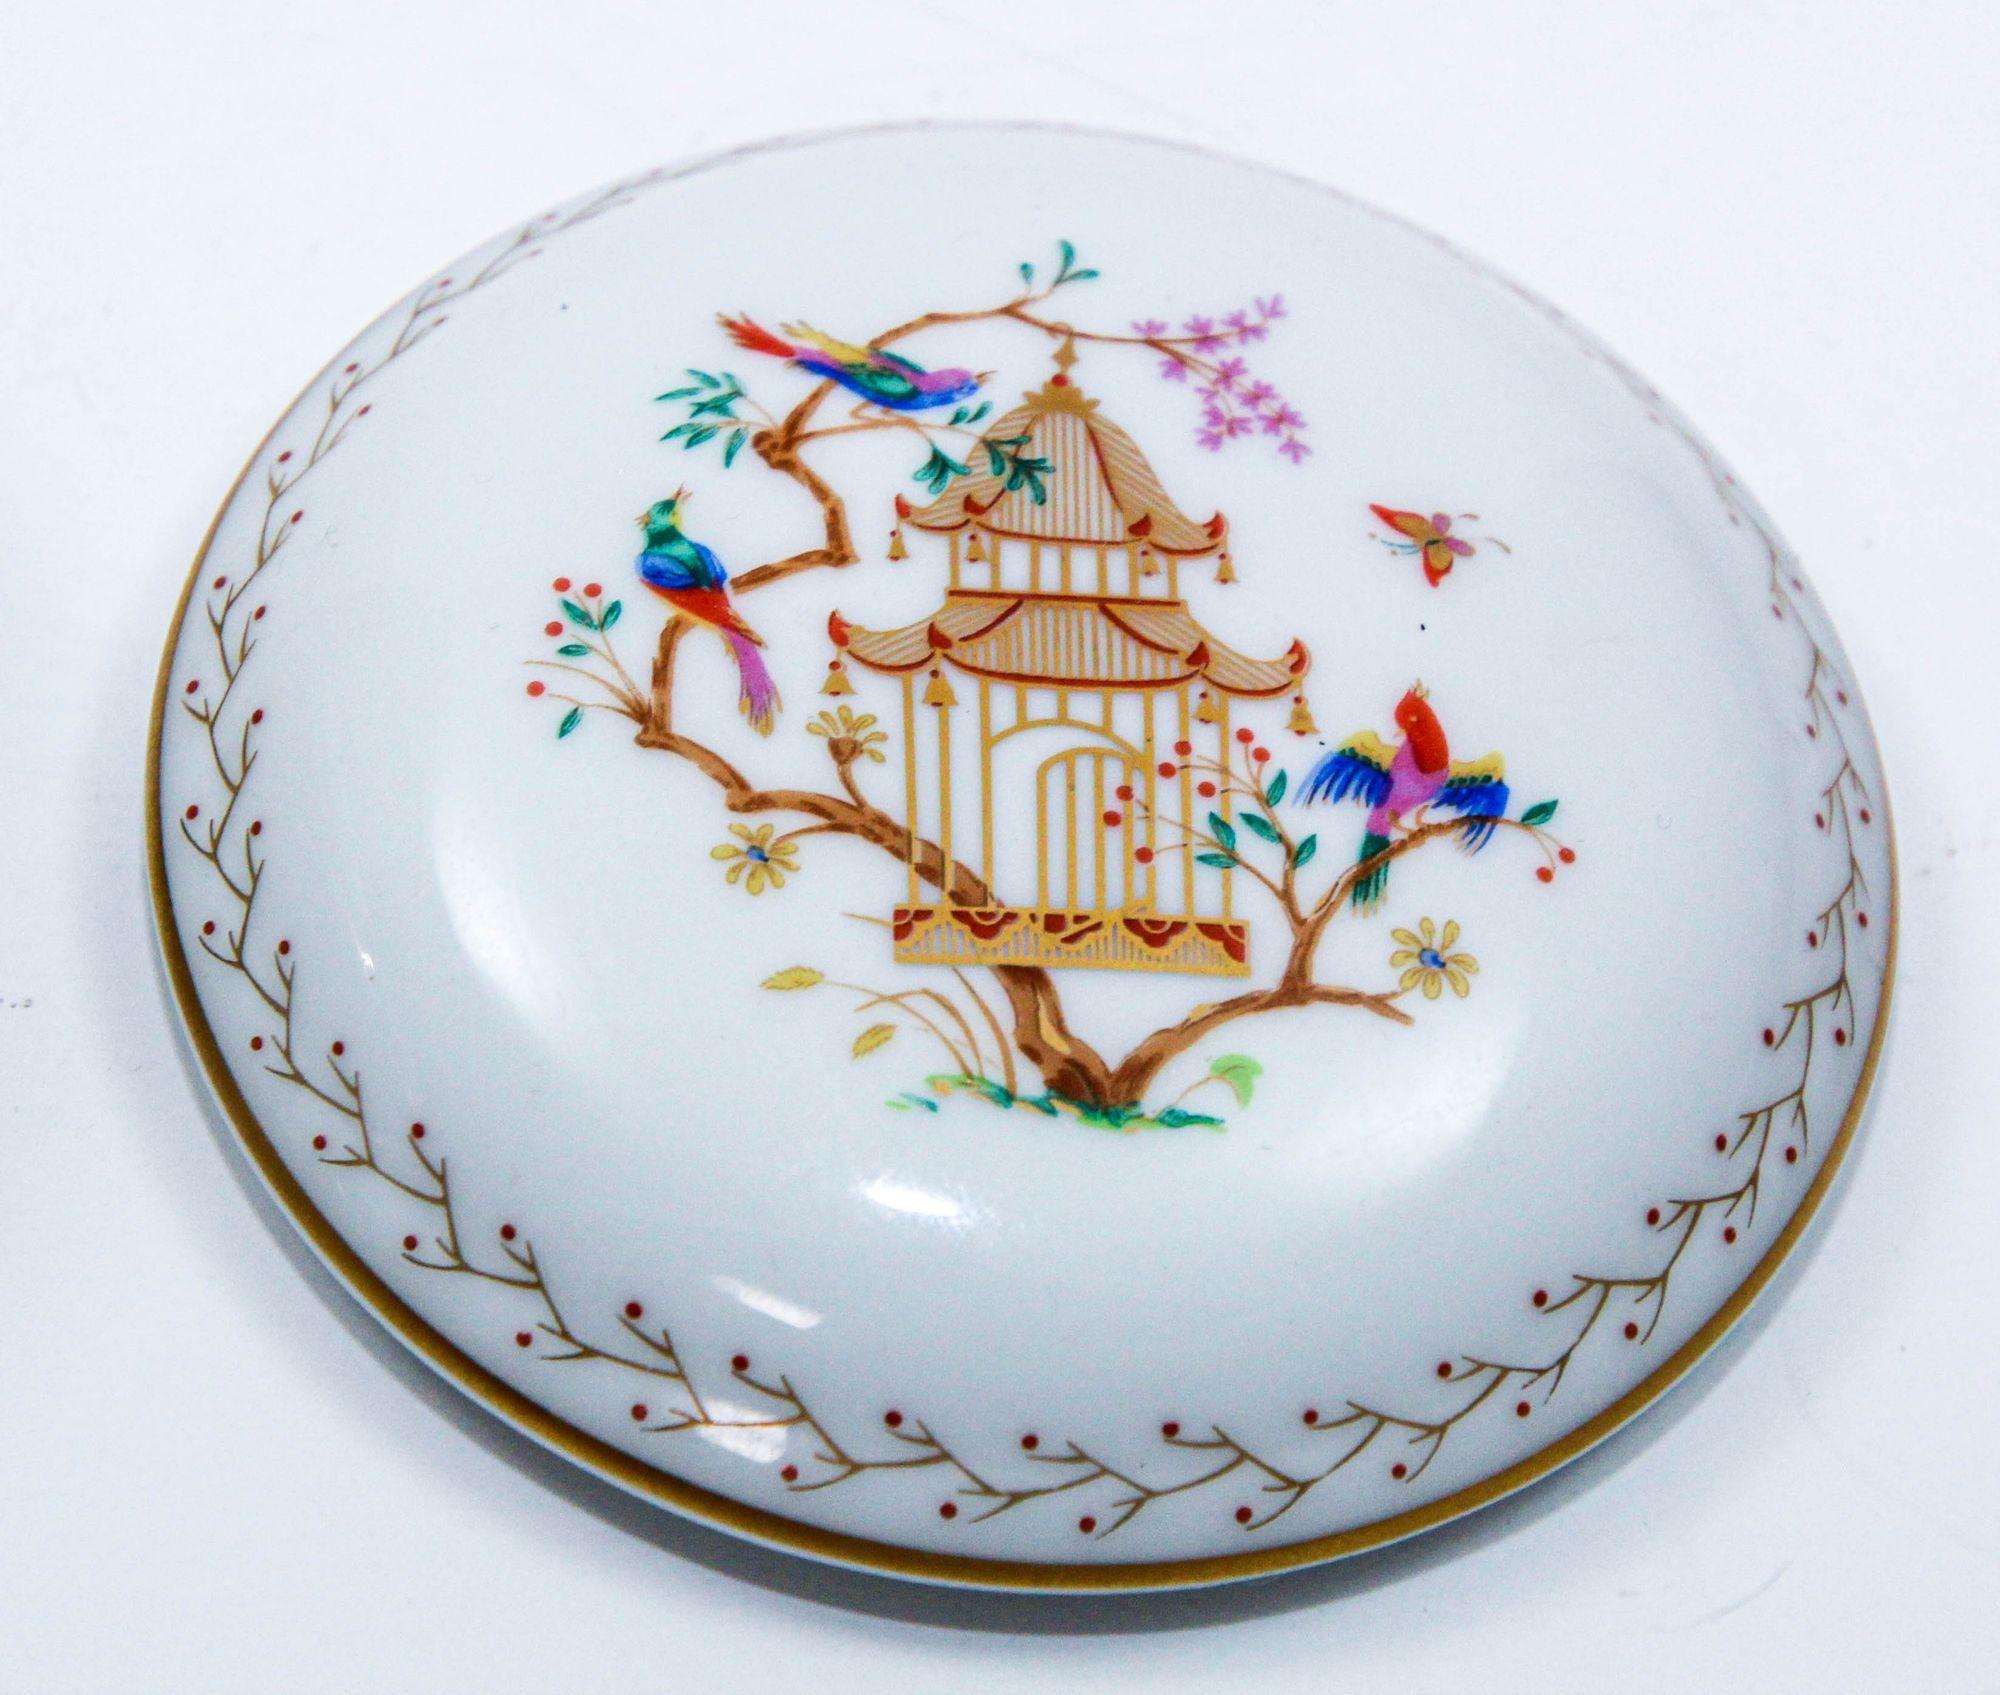 Audubon by TIFFANY & Co Limoges Porcelain Vanity Trinket Box Chinoiserie Decor In Good Condition For Sale In North Hollywood, CA